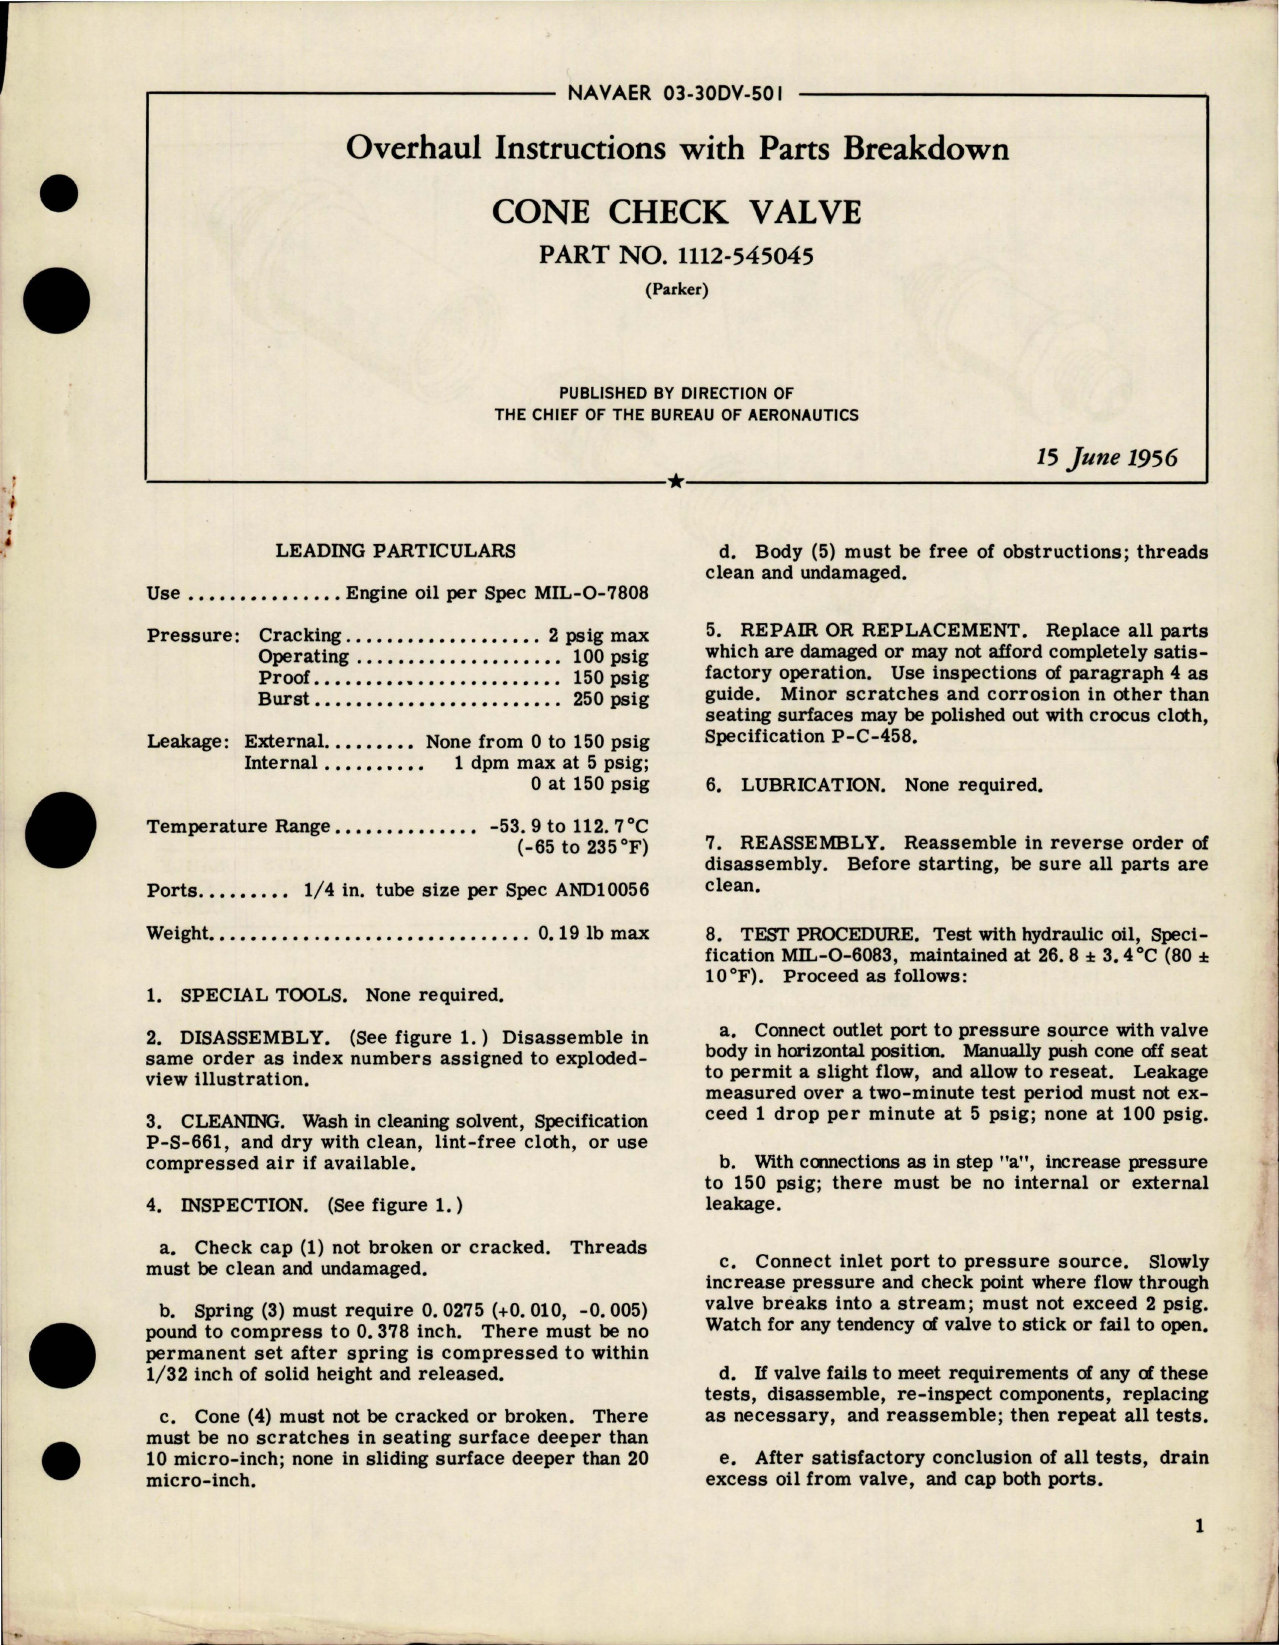 Sample page 1 from AirCorps Library document: Overhaul Instructions with Parts Breakdown for Cone Check Valve - Part 1112-545045 